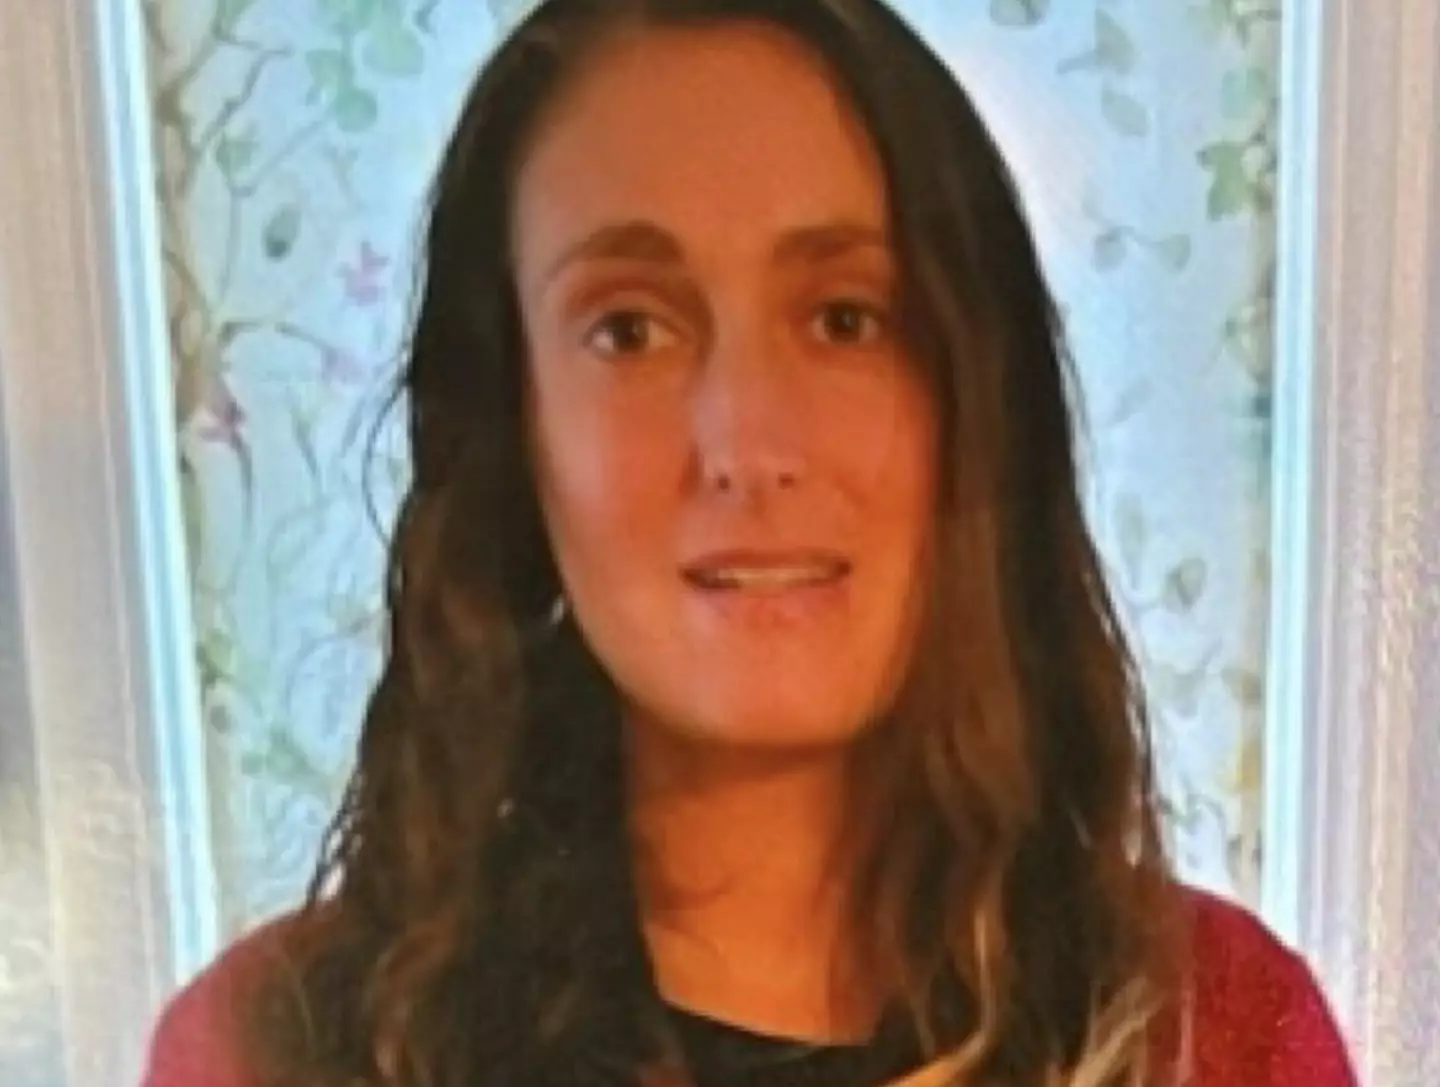 Emma Tetewsky was reported missing after she didn't come home the day prior.